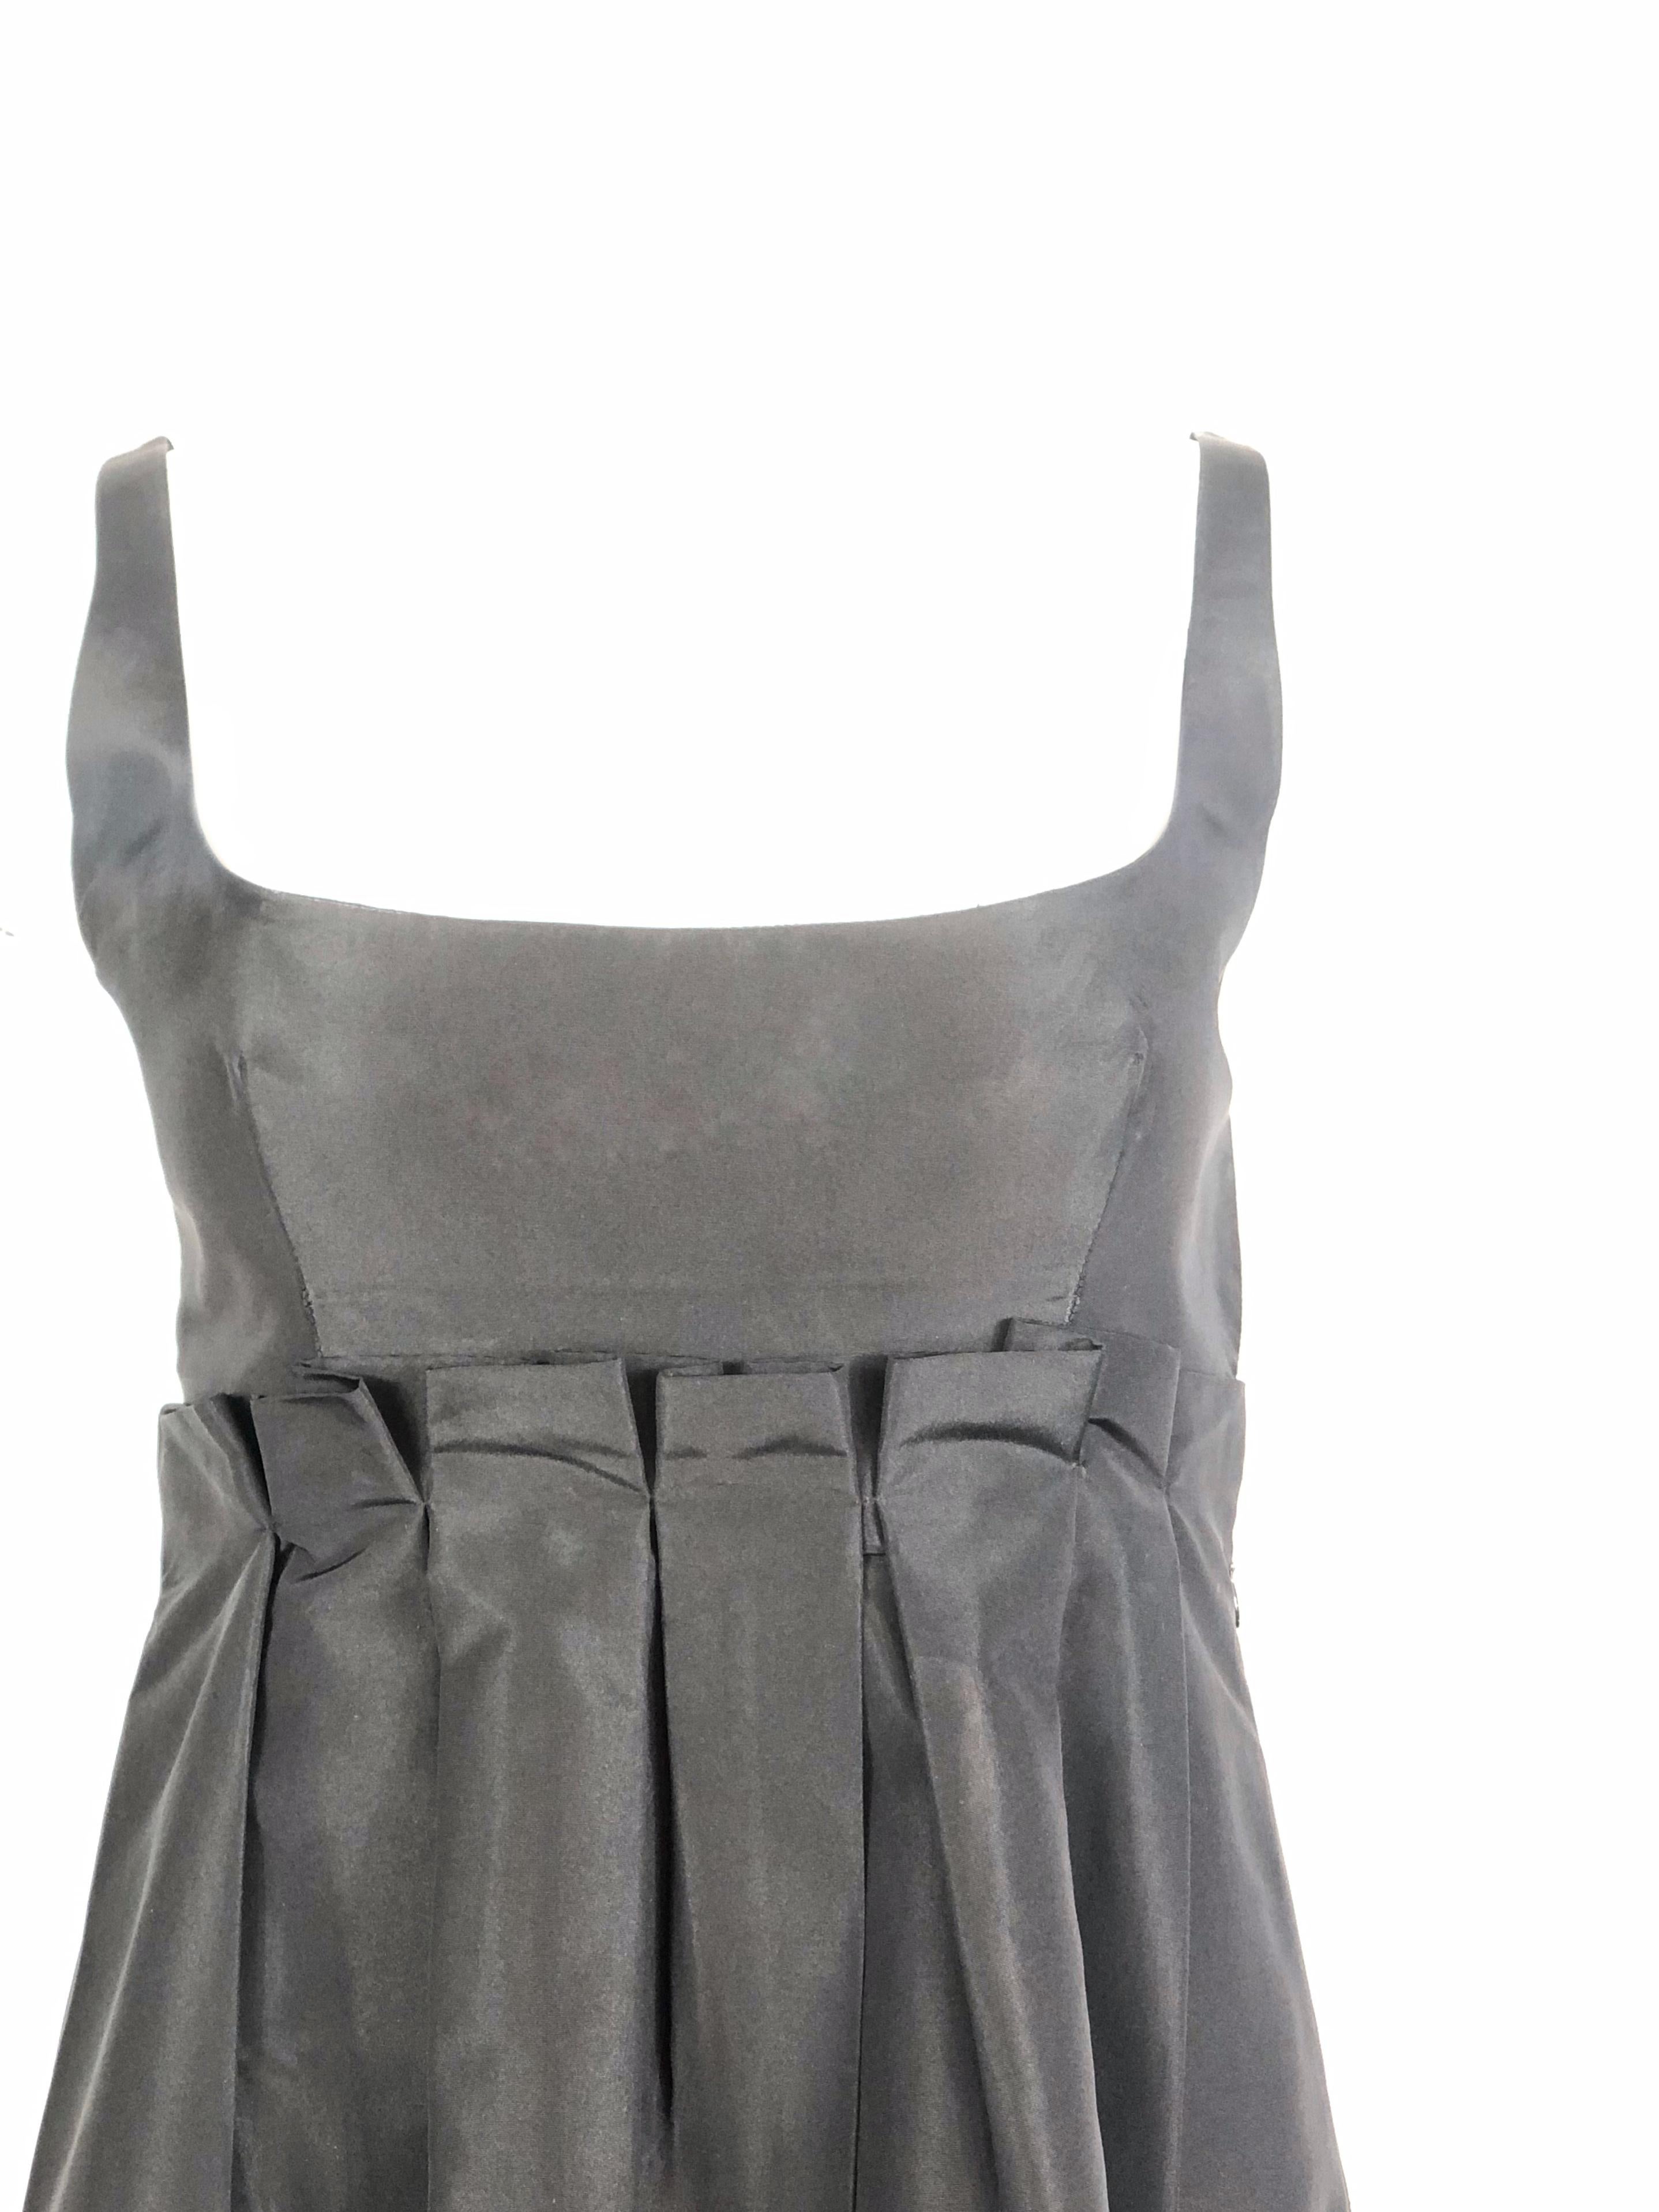 PRADA Black Babydoll Sleeveless Mini Dress Size 42

Product details:
Size 42
Side zipper and hook closure 
Made in Italy
